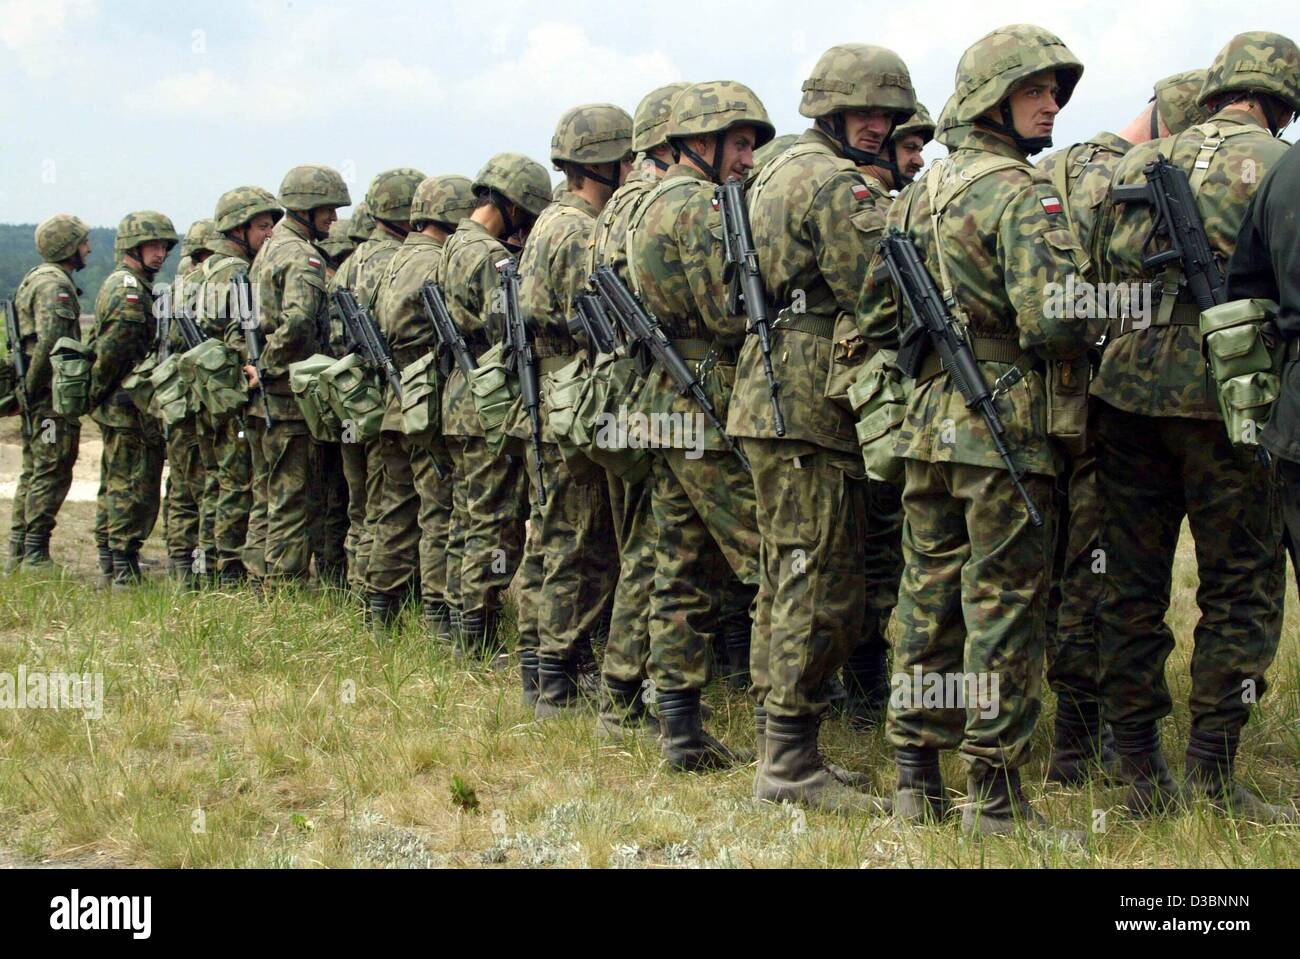 (dpa) - Polish soldiers line up during a military drill of the Polish army under the leadership of German officers near the German border in Swietoszow, Poland, 14 May 2003. Poland has officially asked a NATO military study on possible alliance support for Poland's planned military mission in Iraq.  Stock Photo